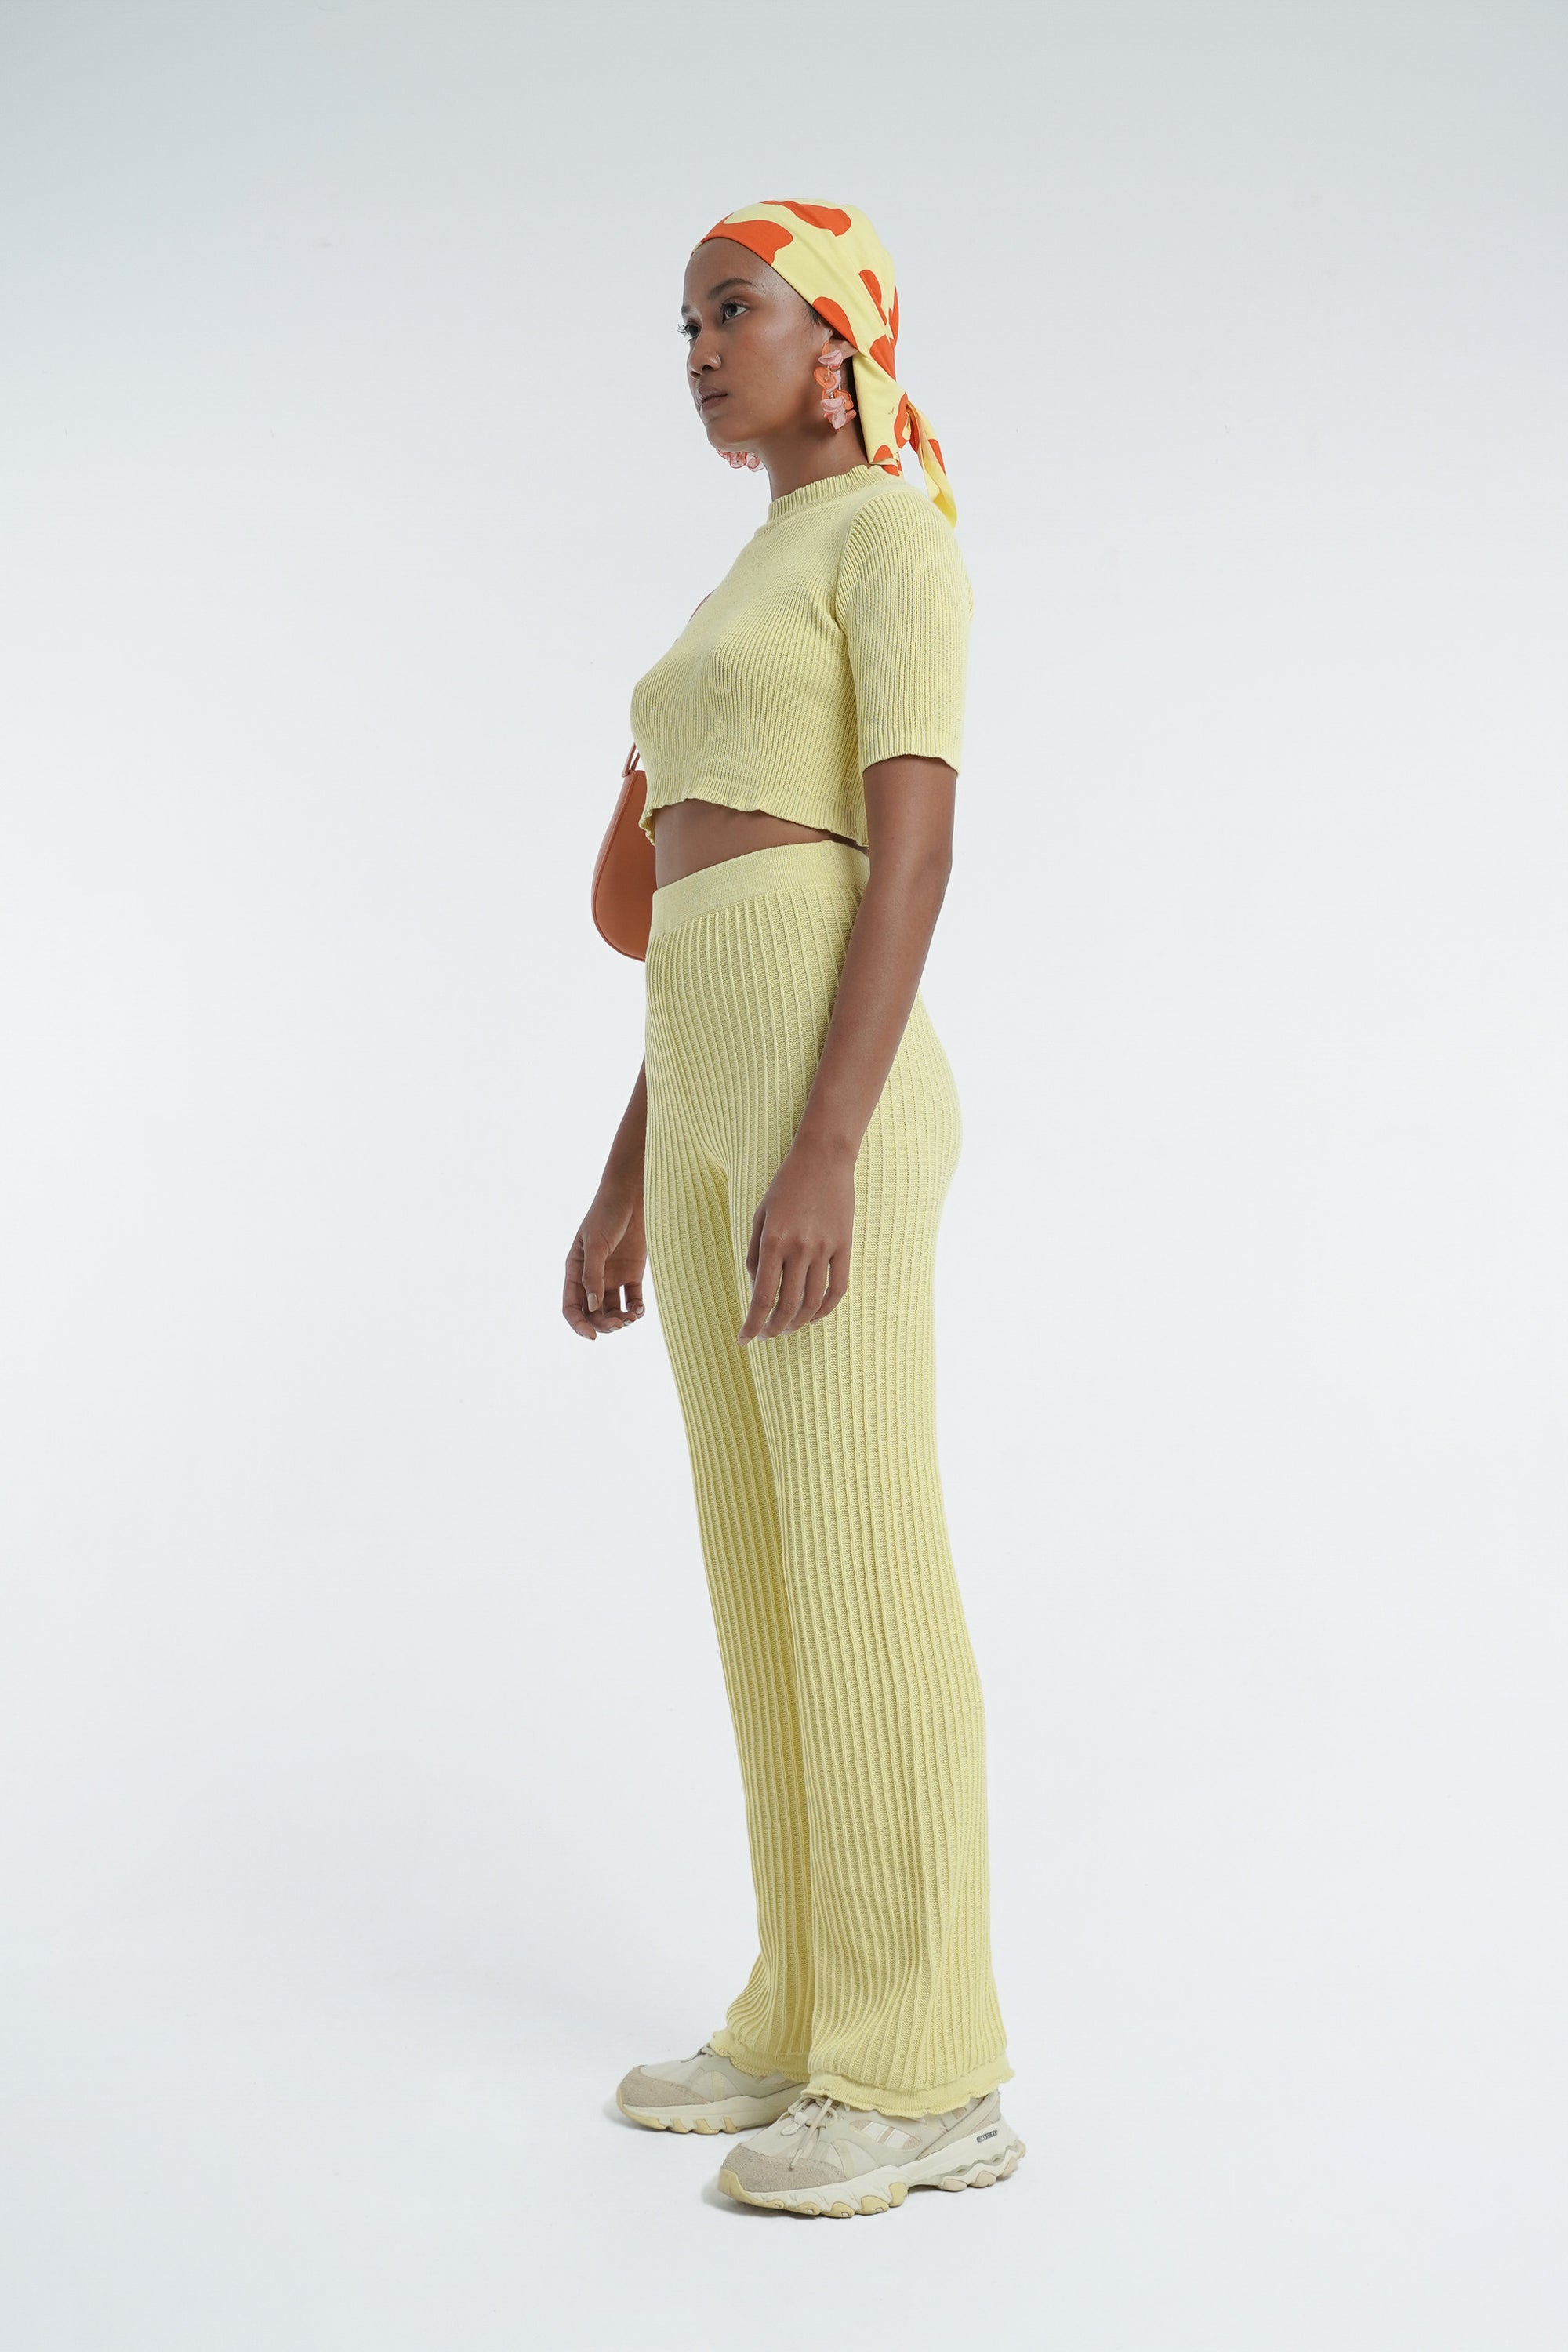 Highrise Knit Top in Limoncello